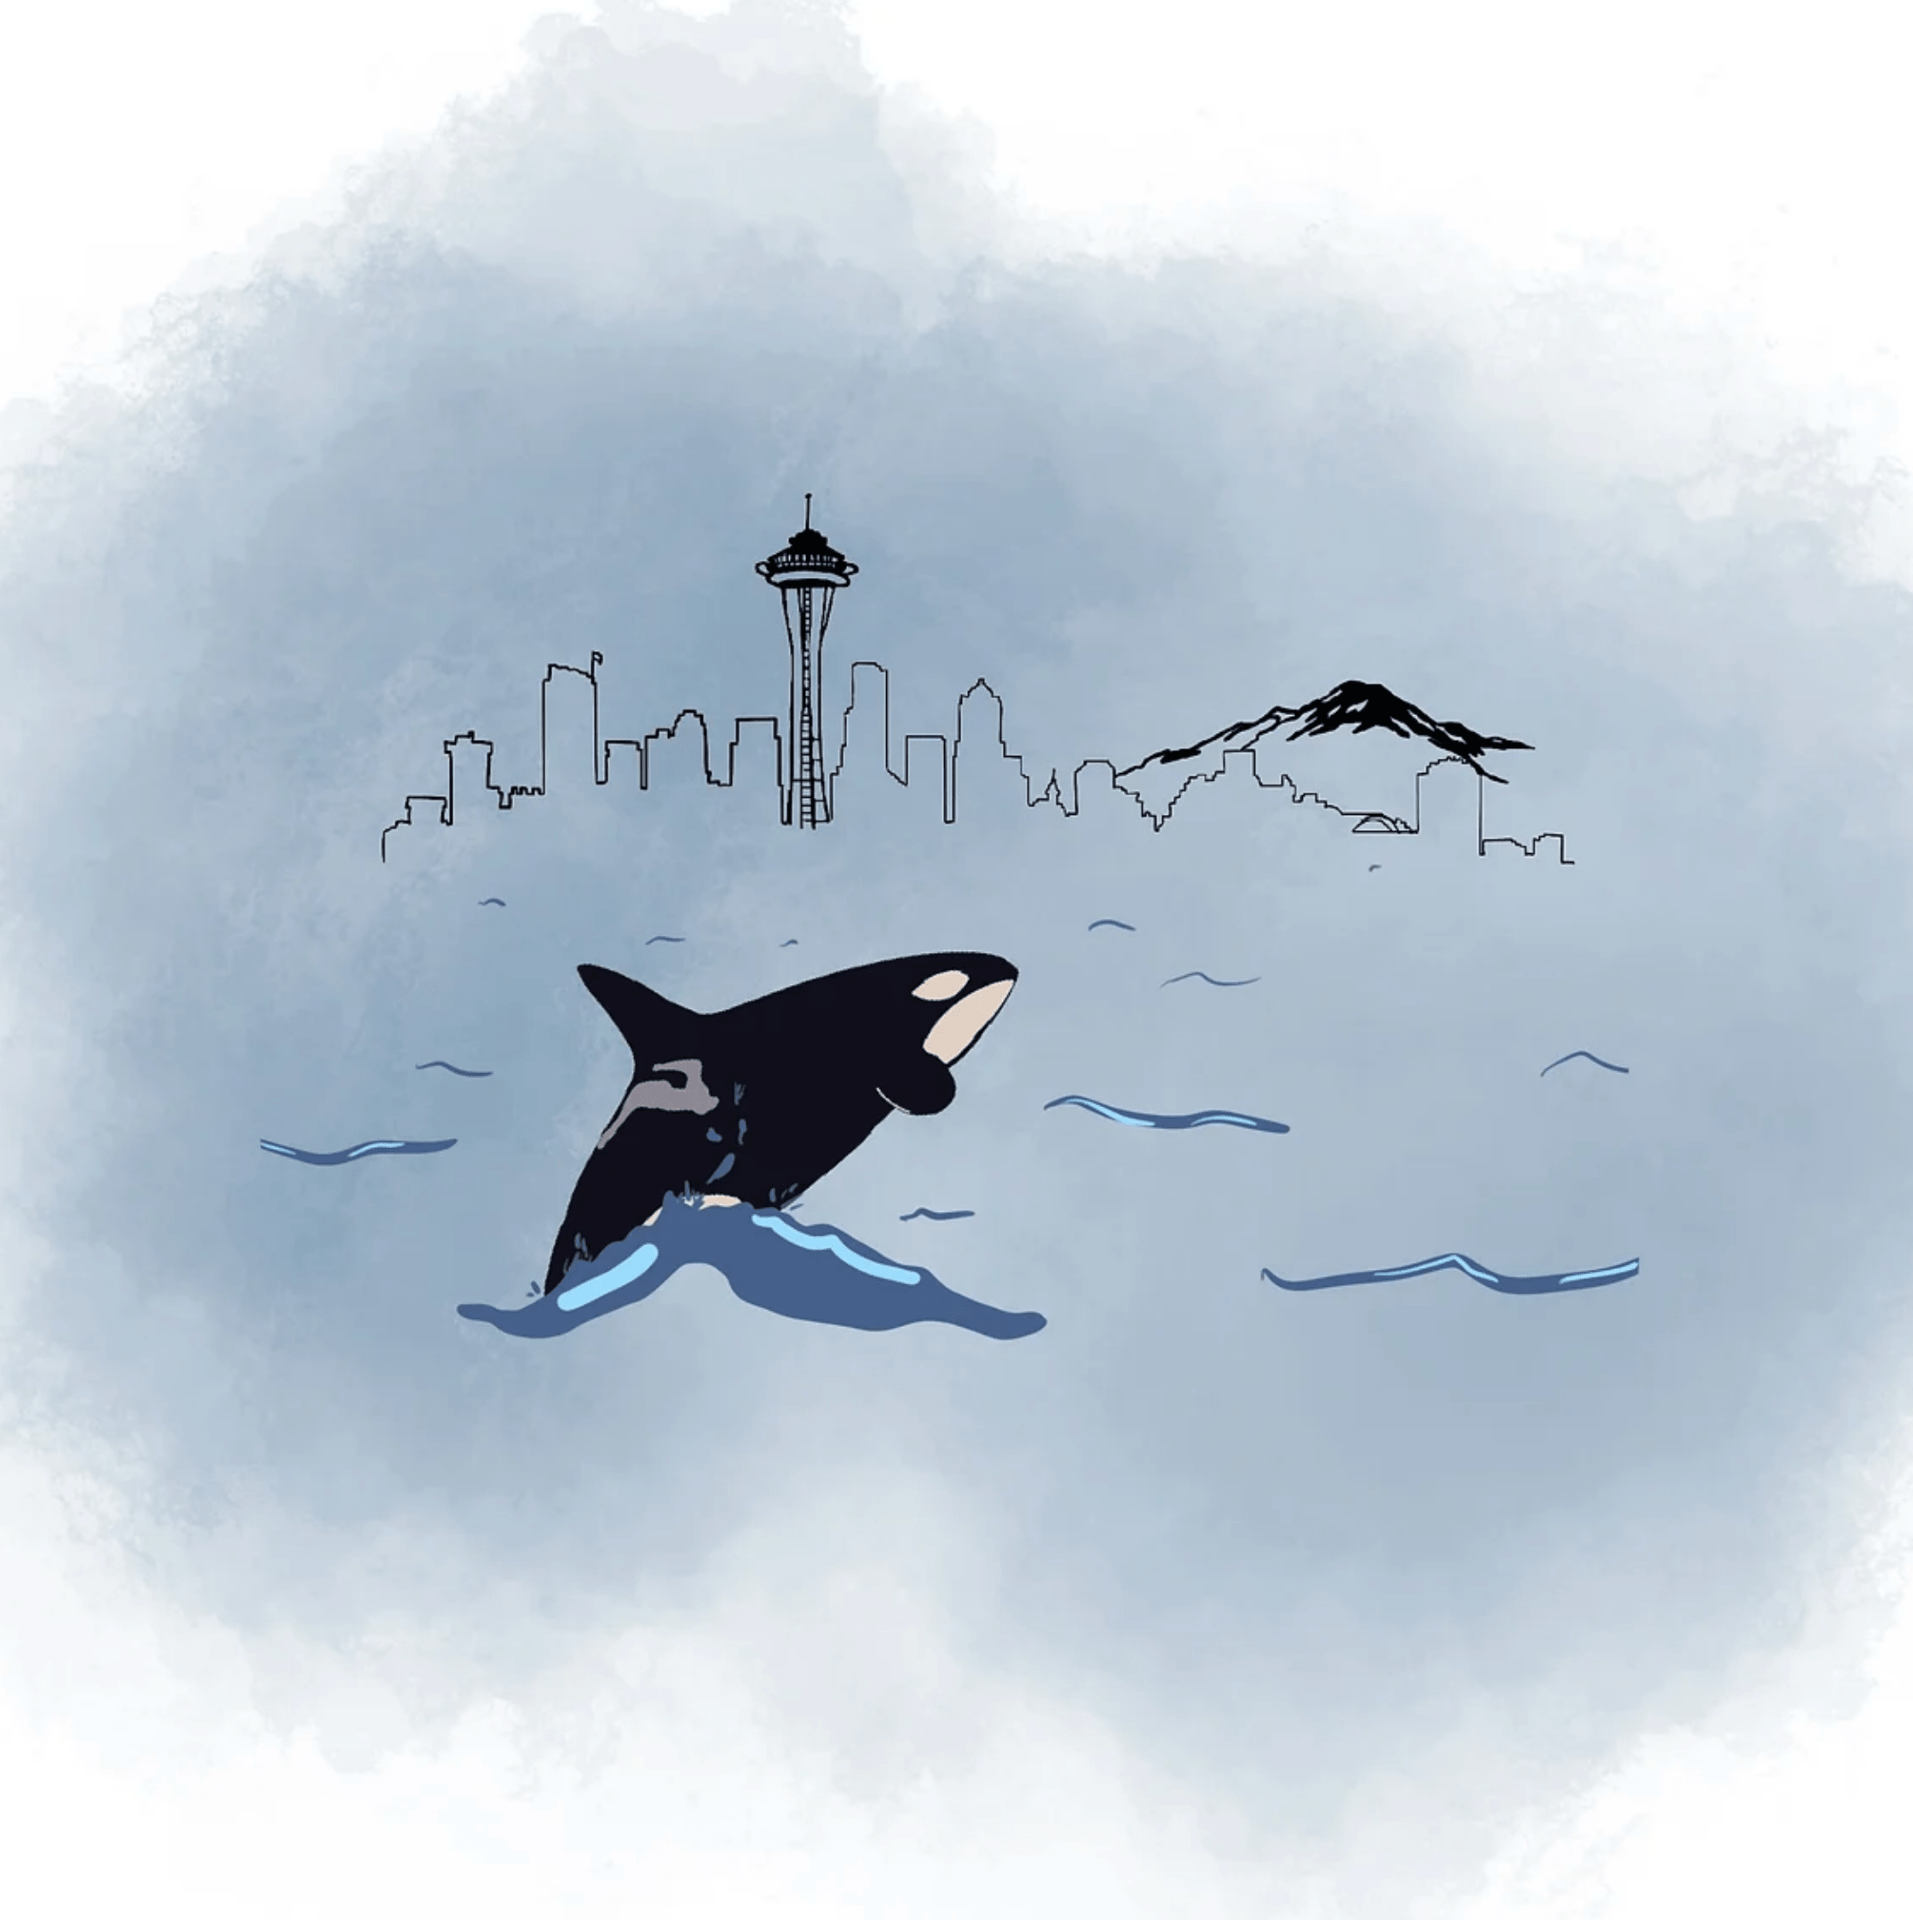 drawing of a whale jumping out of the water in front of the Seattle skyline